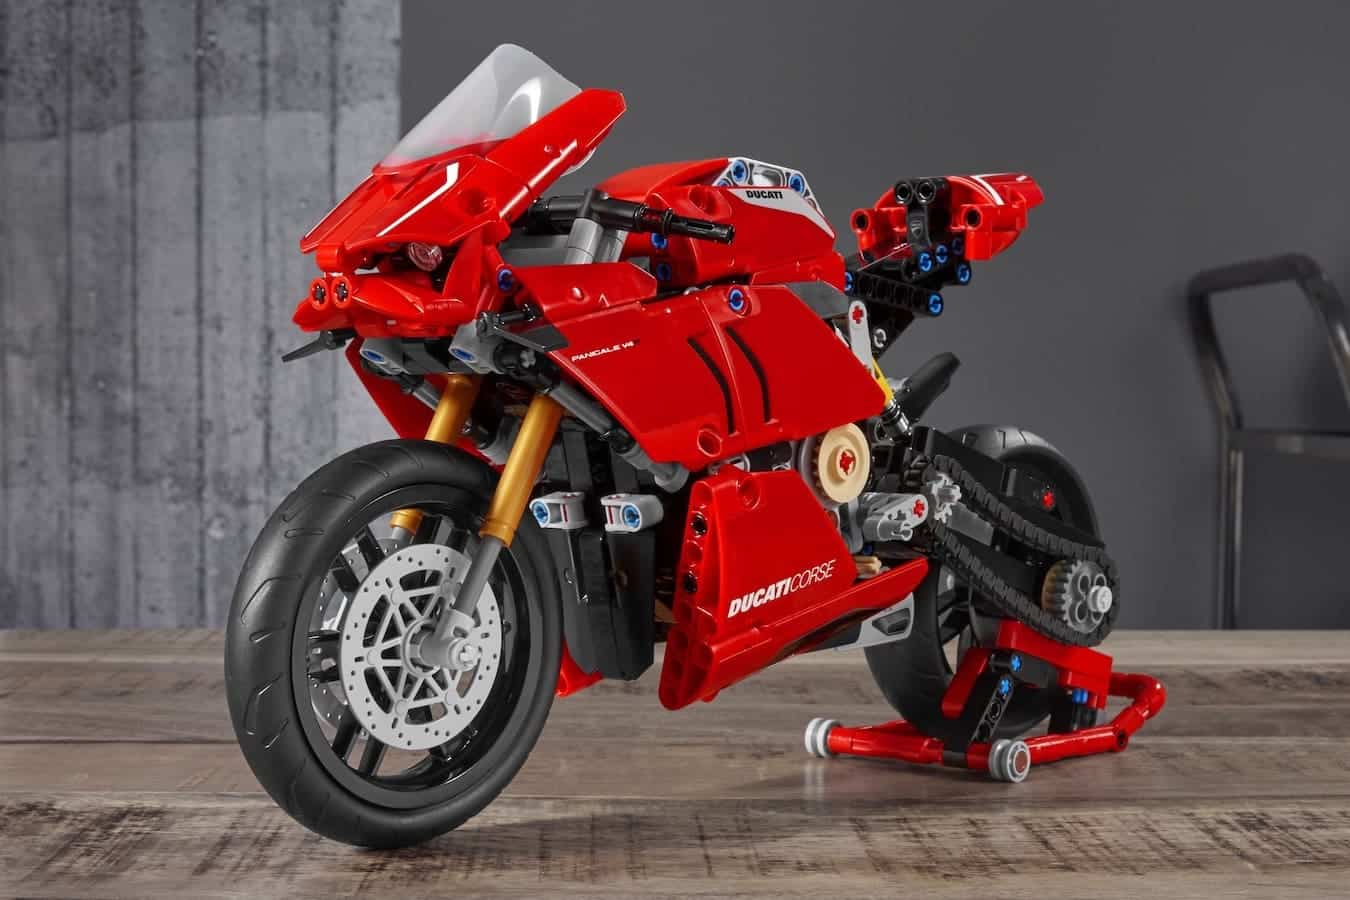 Lego Ducati Panigale vs Real Panigale smaller for Lego Ducati Panigale V4R vs Actual, Real Panigale